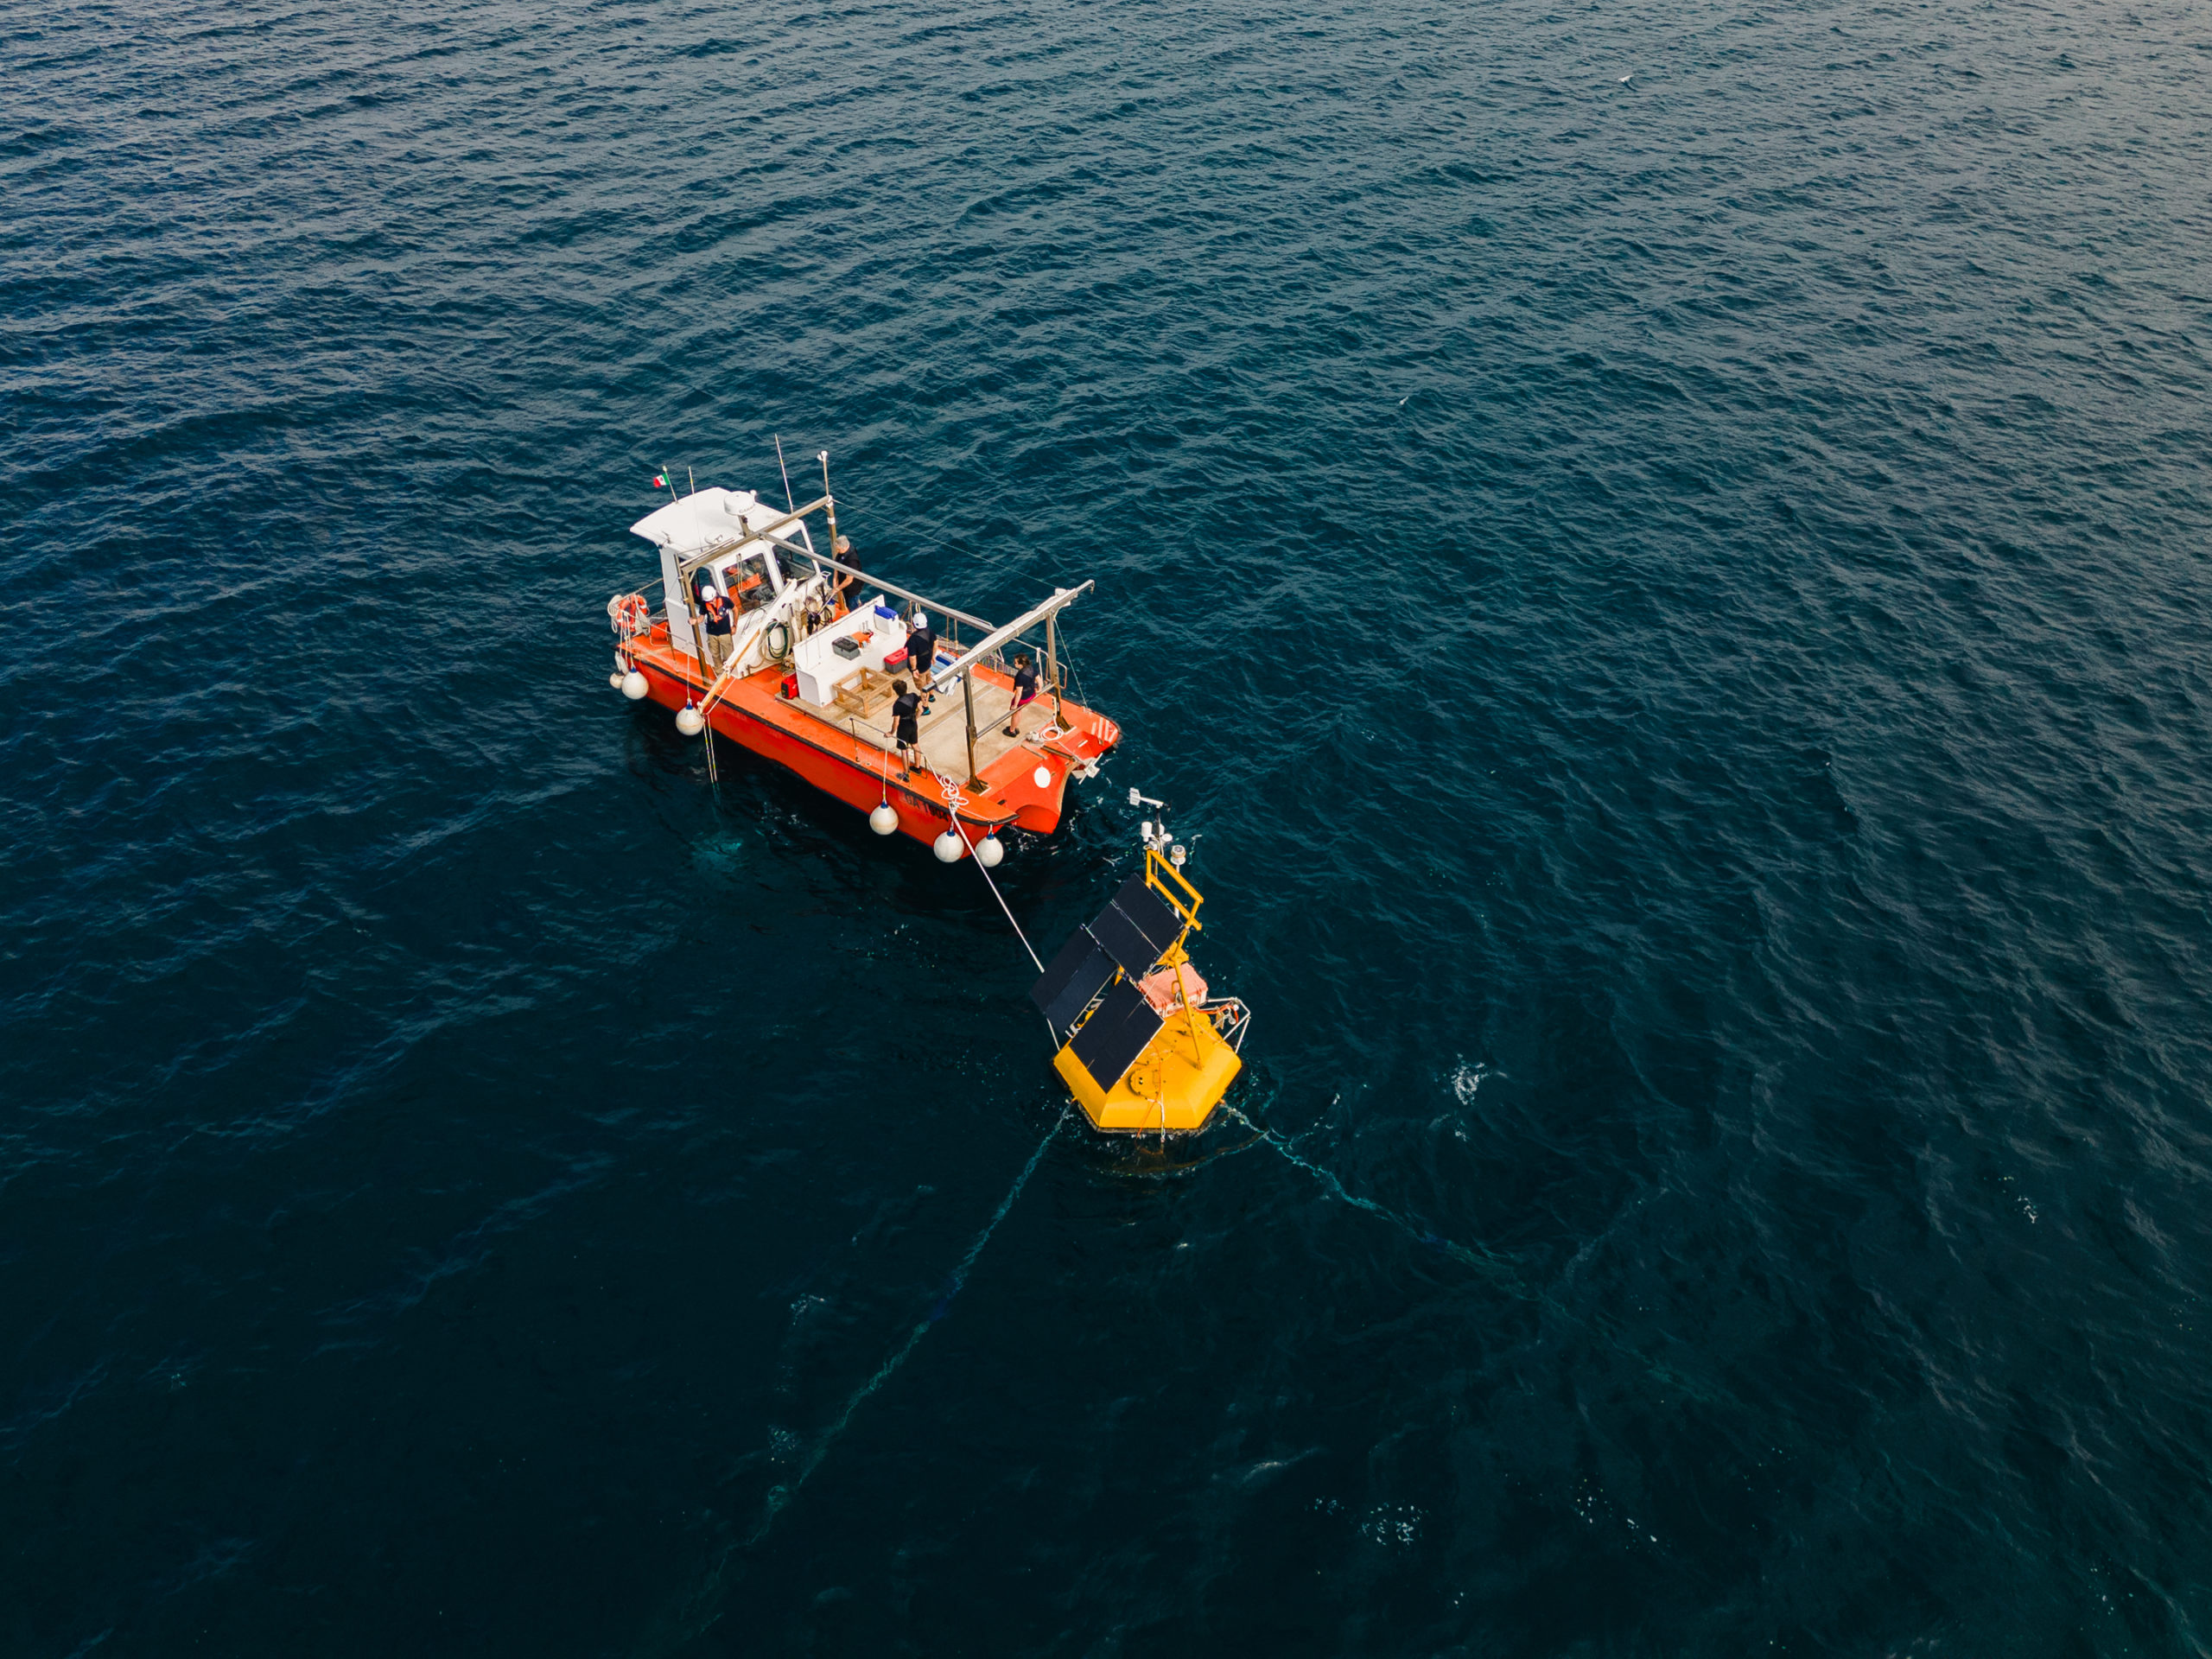 Charting New Waters – How New Technologies are Drastically Improving Autonomous Ocean Observations